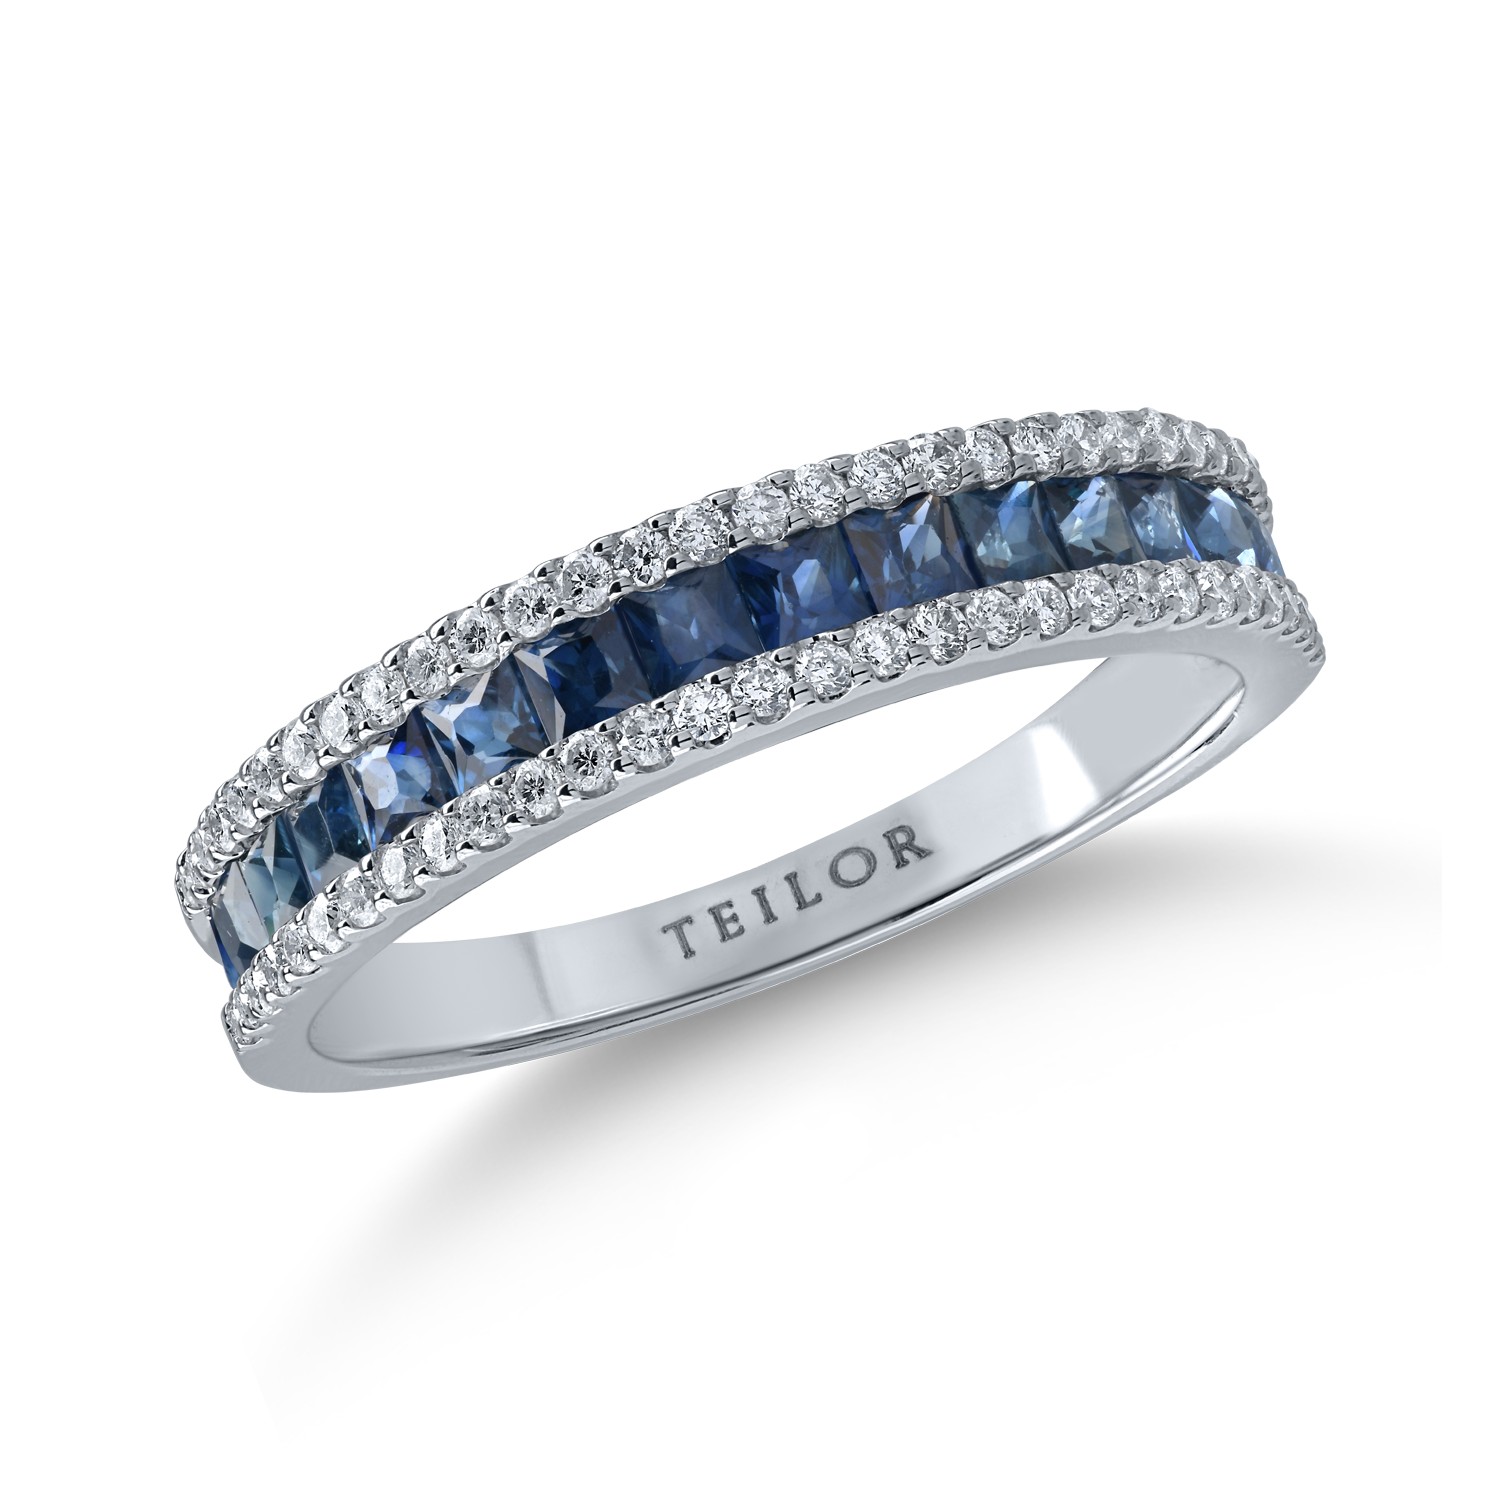 Half eternity ring in white gold with 0.87ct sapphires and 0.25ct diamonds